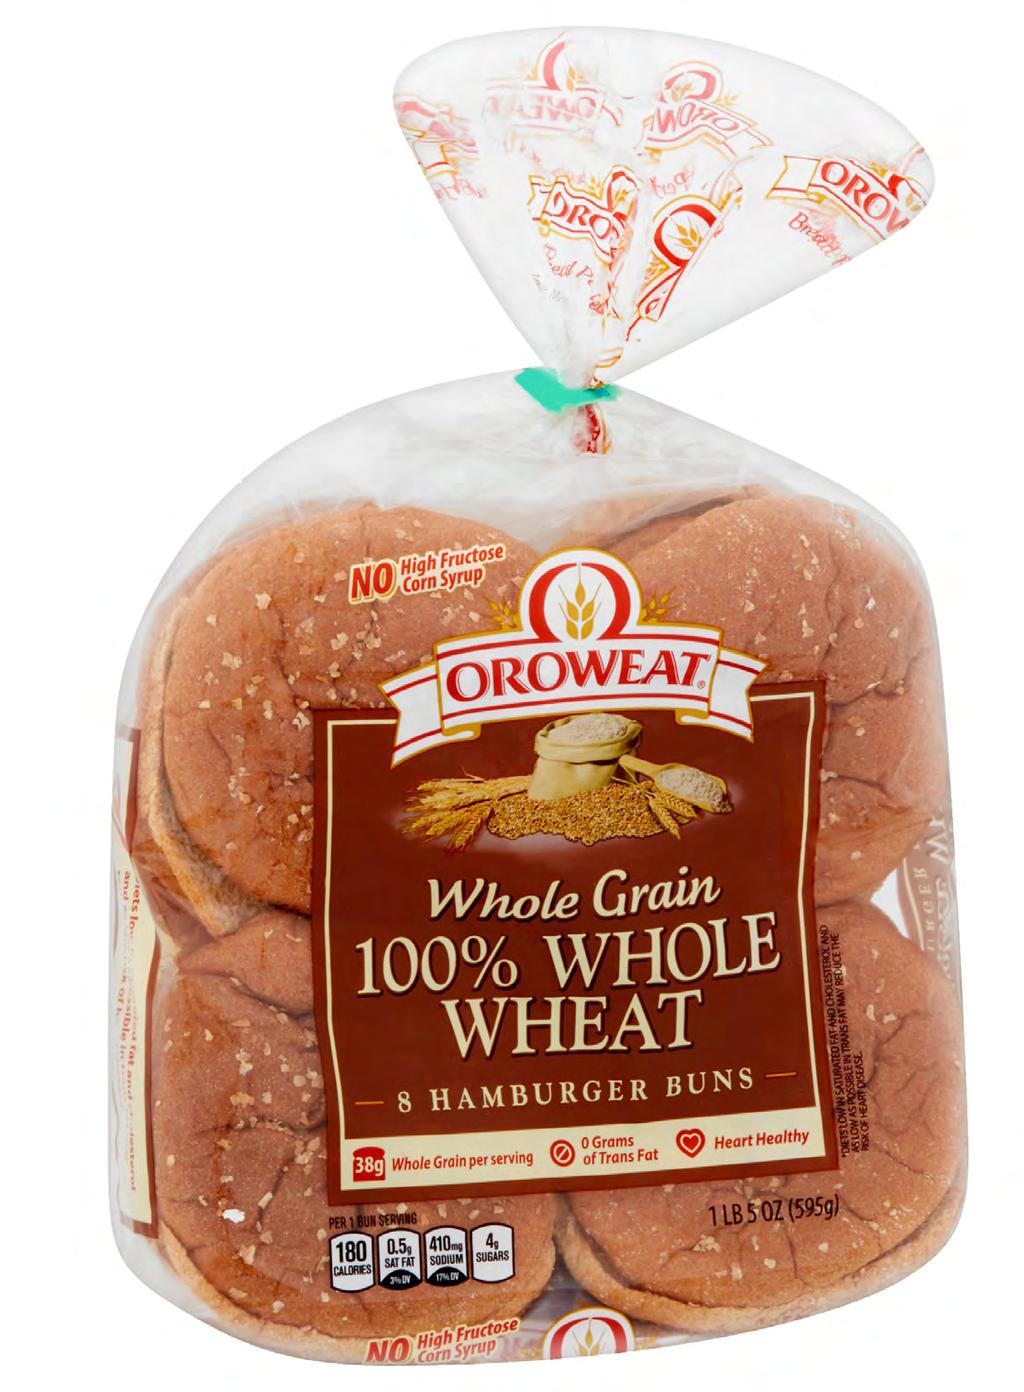 Whole Grain #1 2nd Grain Ingredient INGREDIENTS: Whole Corn, Sunflower and/or Canola Oil, Whole Wheat, Brown Rice Flour, Whole Oat Flour, Sugar, Salt, Natural Flavor, and Maltodextrin (Made from